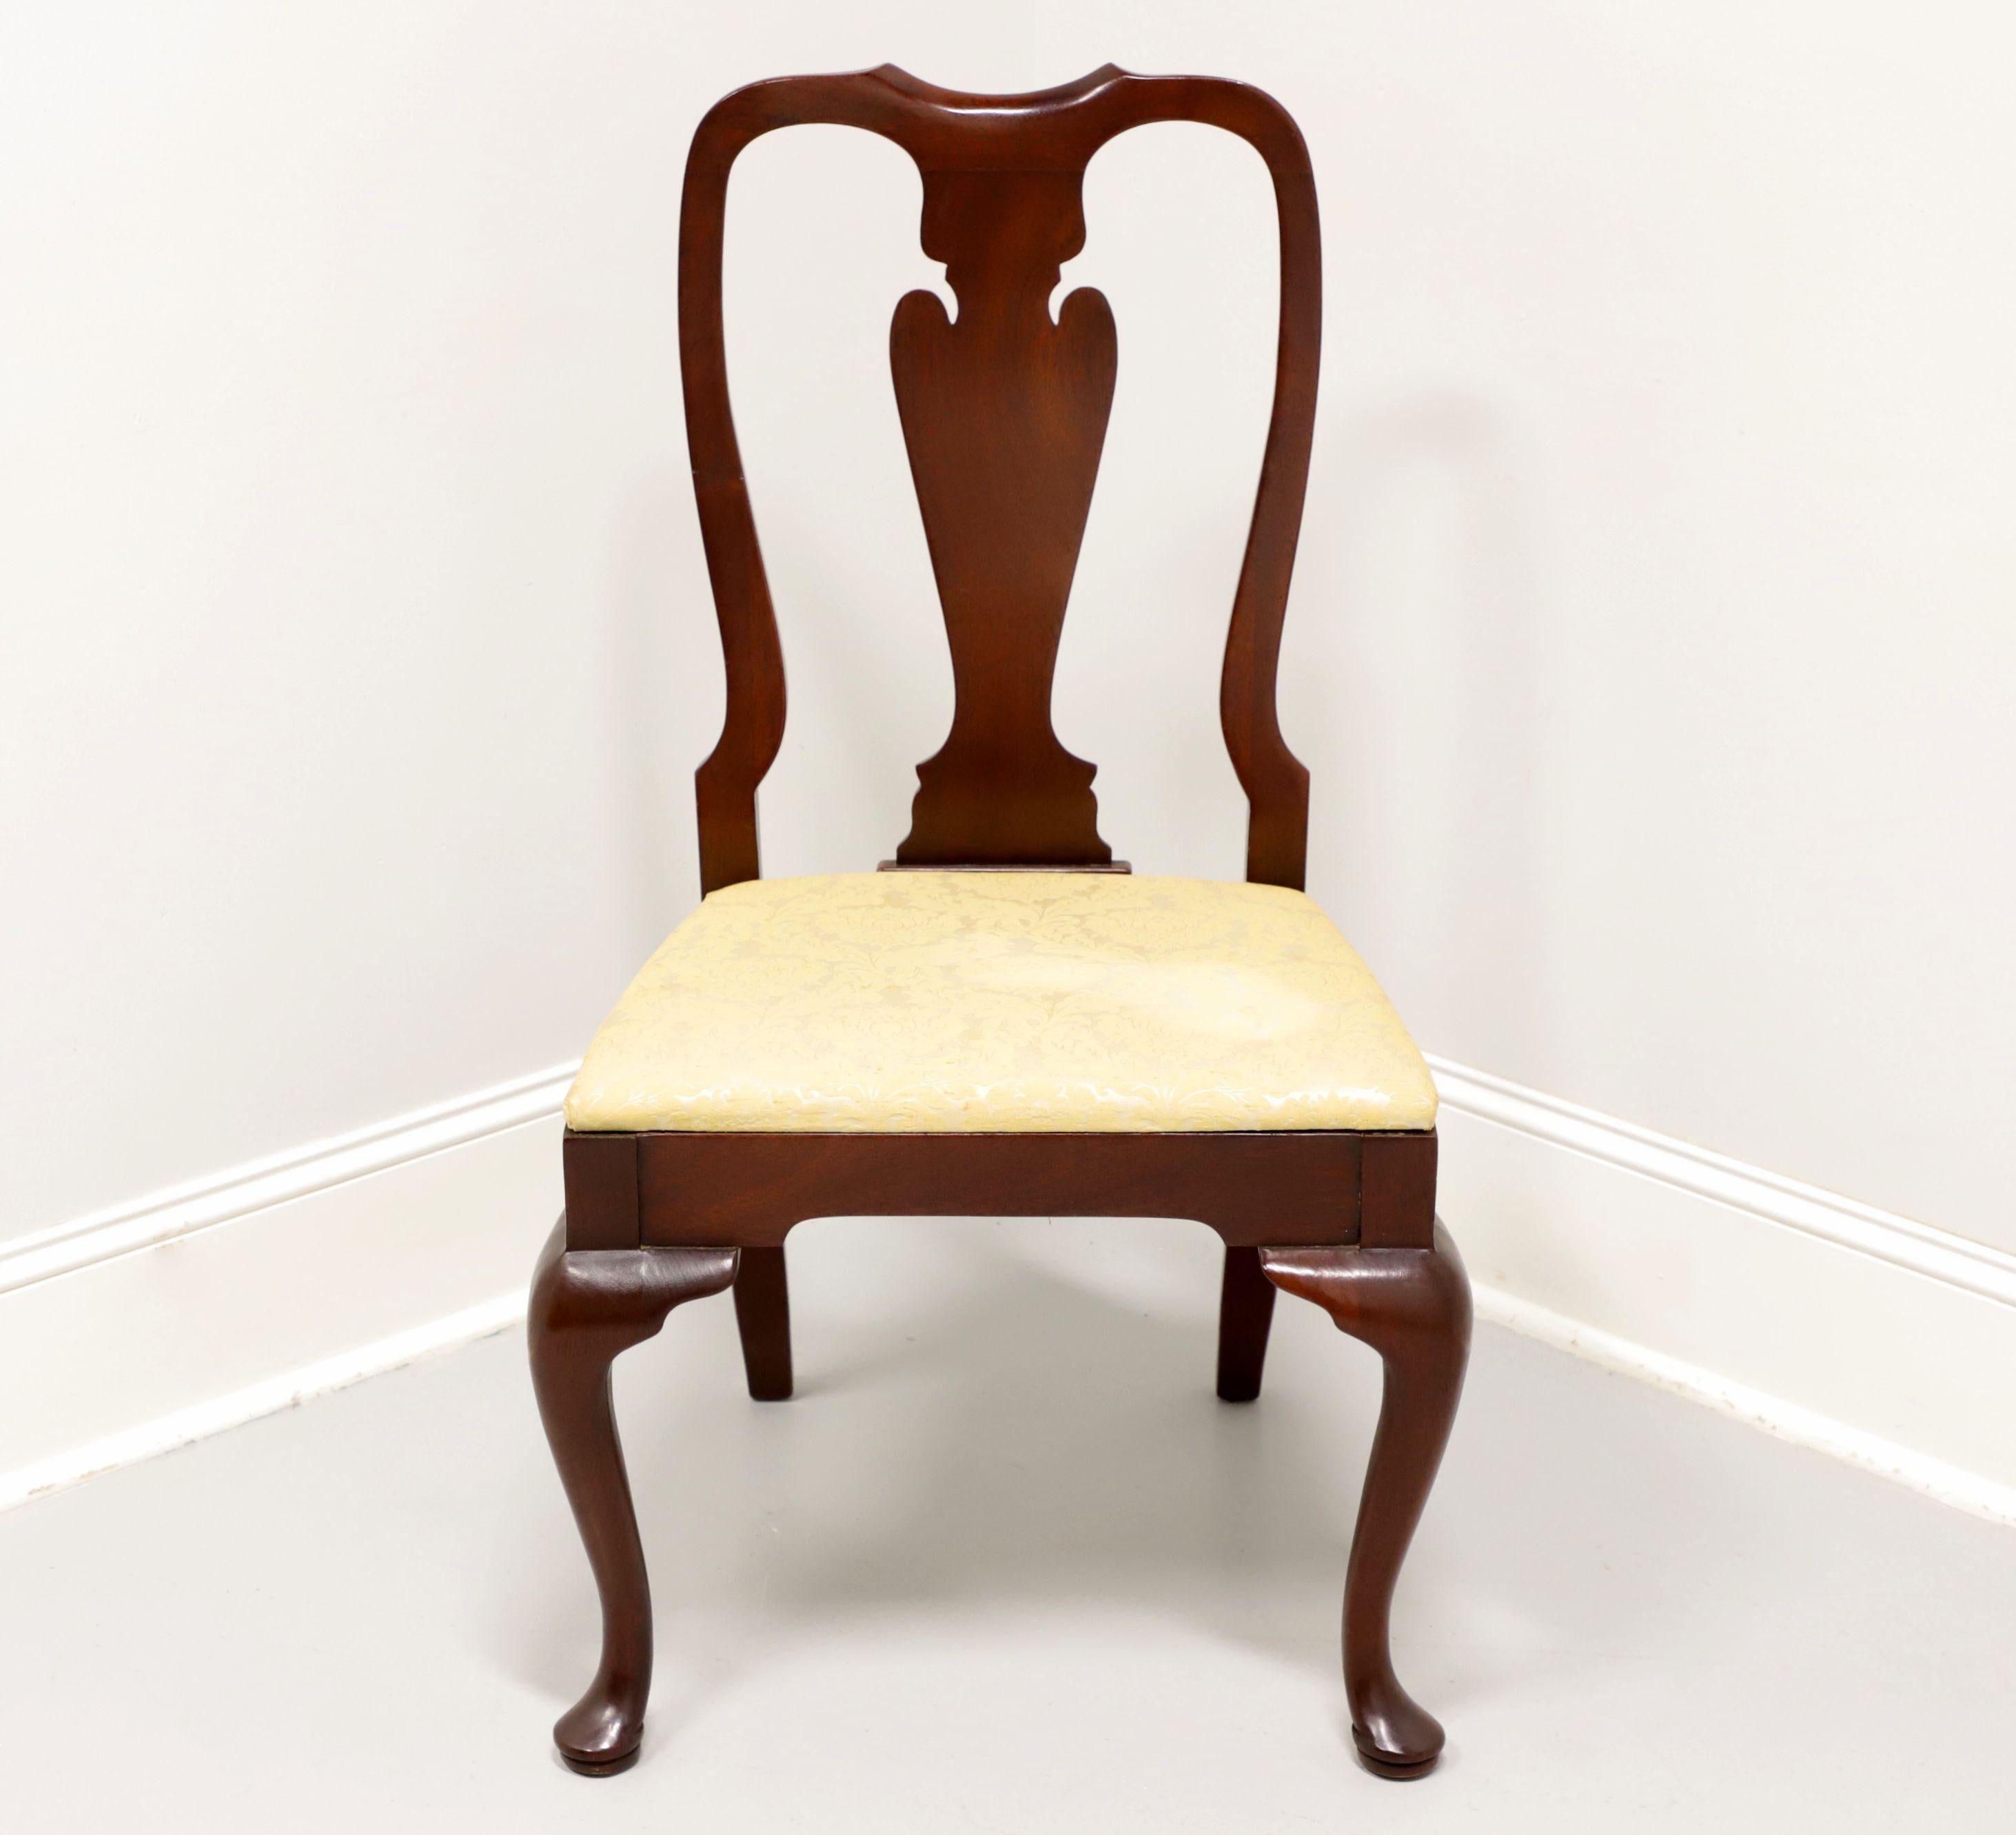 A Queen Anne style dining side chair by Hickory Chair. Mahogany with solid carved back, a creamy yellow fabric upholstered seat, cabriole legs and pad feet. Made in North Carolina, USA, in the late 20th century.

Measures: Overall: 22.25w 23.5d